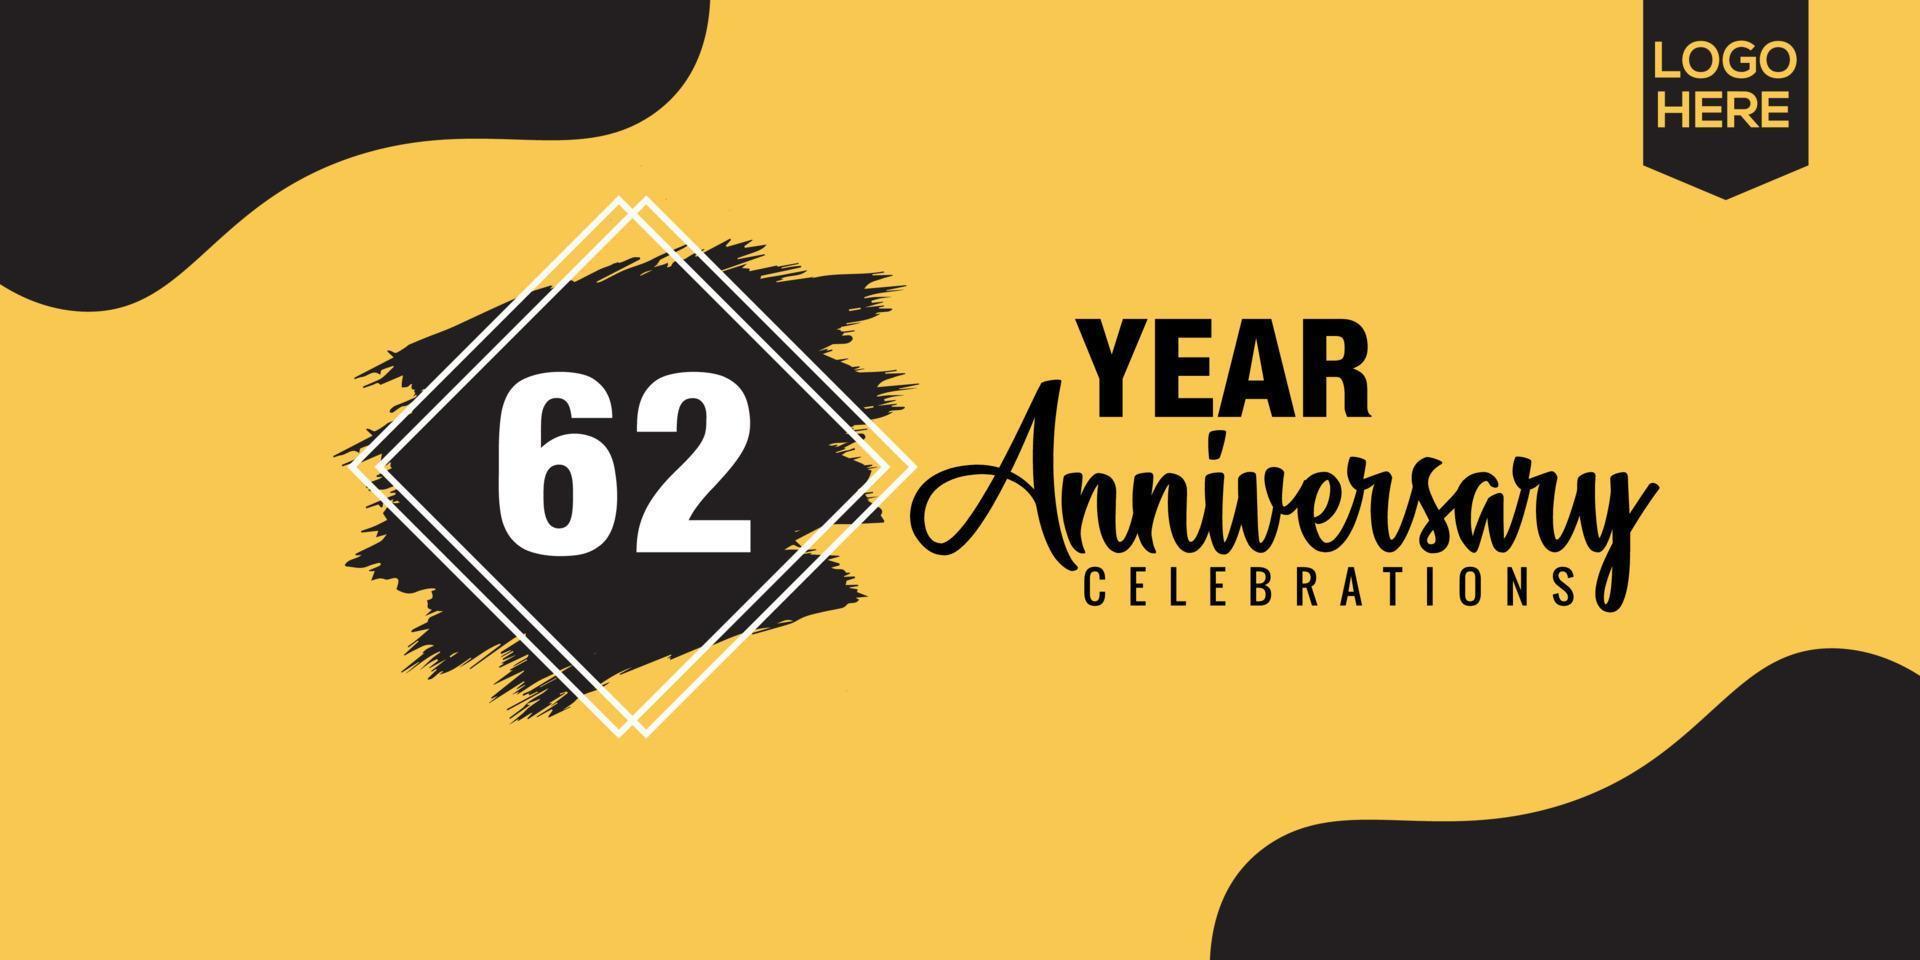 62nd years anniversary celebration logo design with black brush and yellow color with black abstract vector illustration